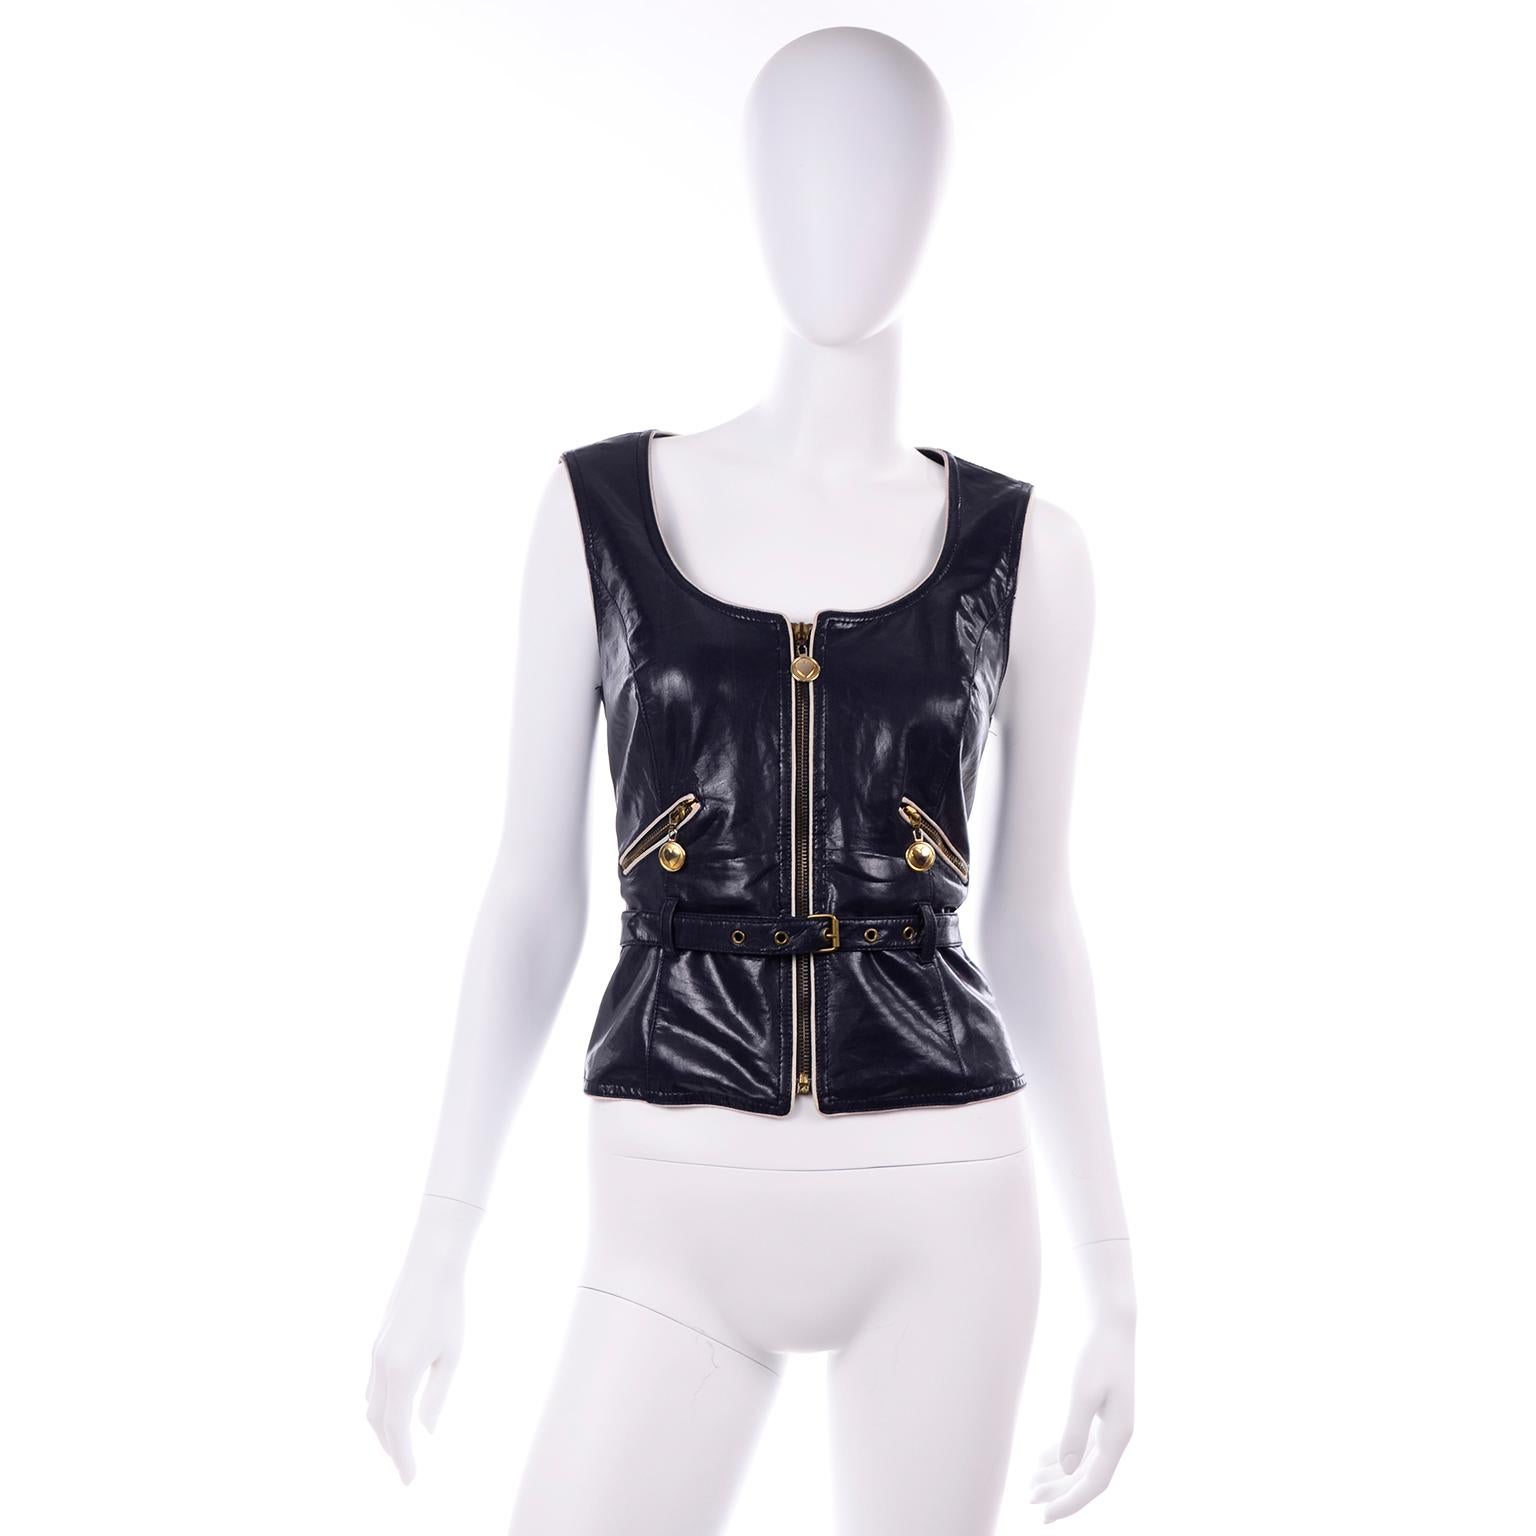 This is a wonderful vintage navy blue faux leather vest with white piping and gold hardware from Moschino Jeans. This collectible designer piece was made in Italy in the early 1990's.  There are two zip slash pockets on the front and a center zipper